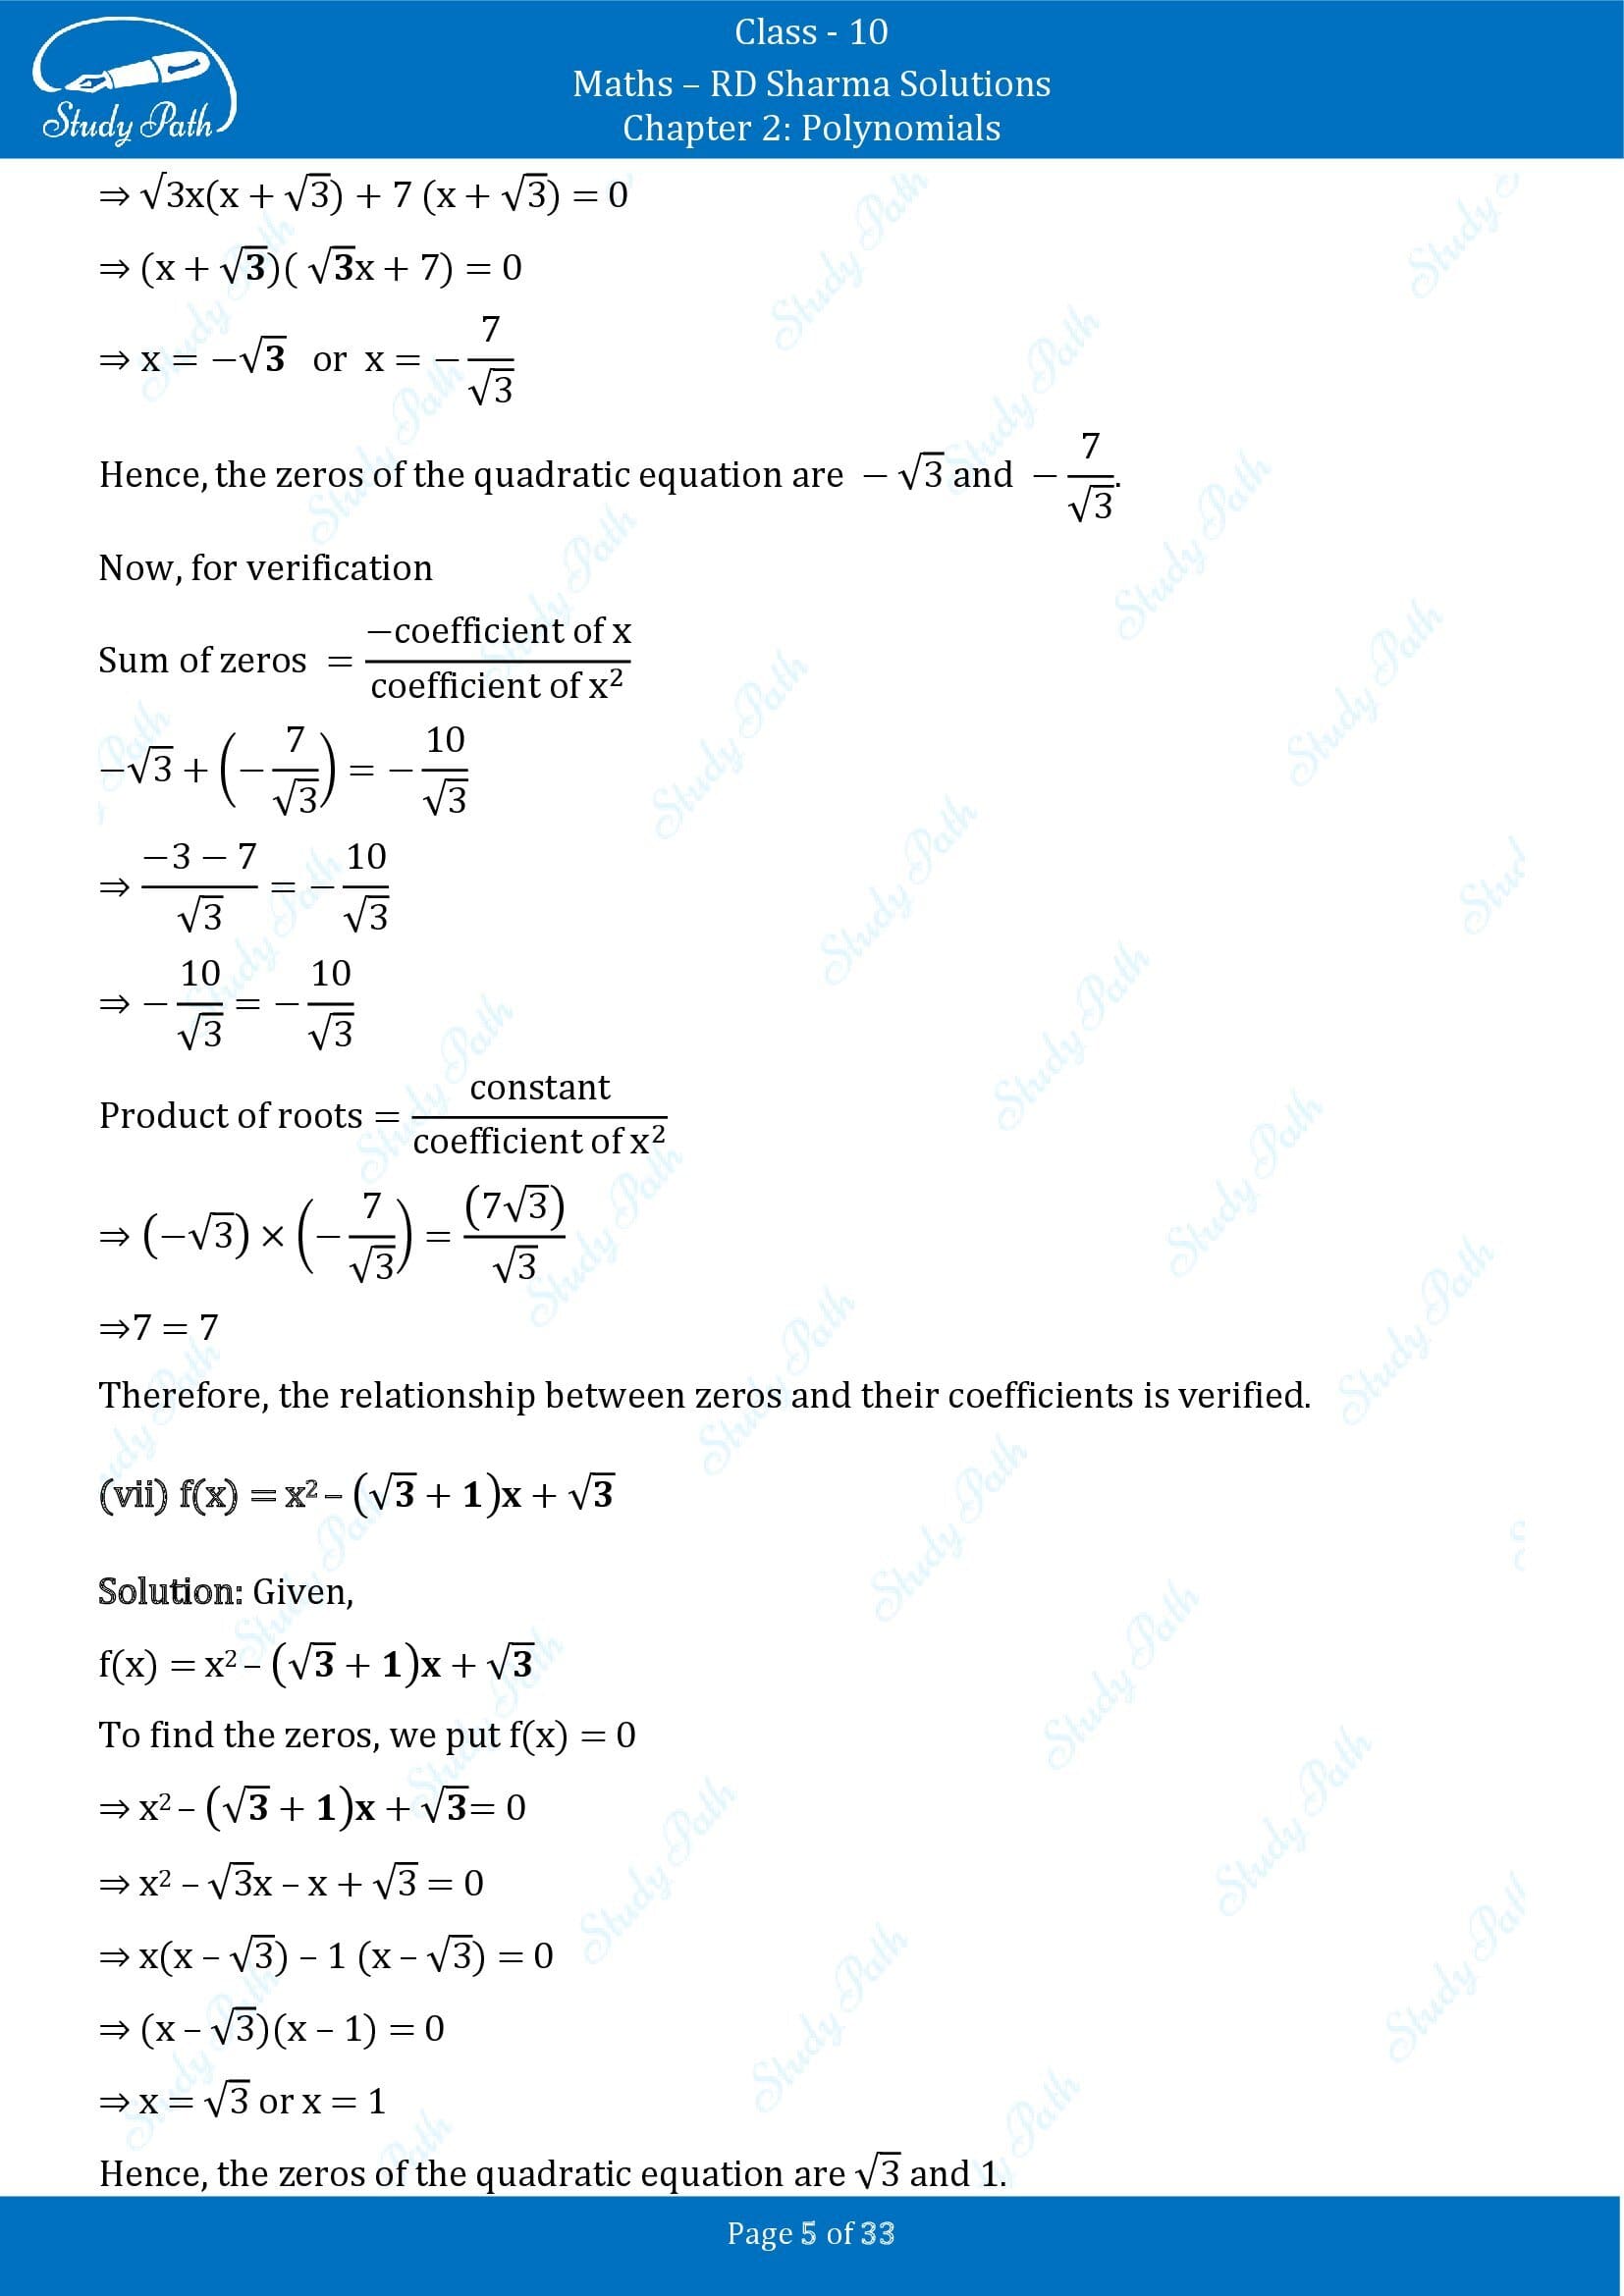 RD Sharma Solutions Class 10 Chapter 2 Polynomials Exercise 2.1 00005